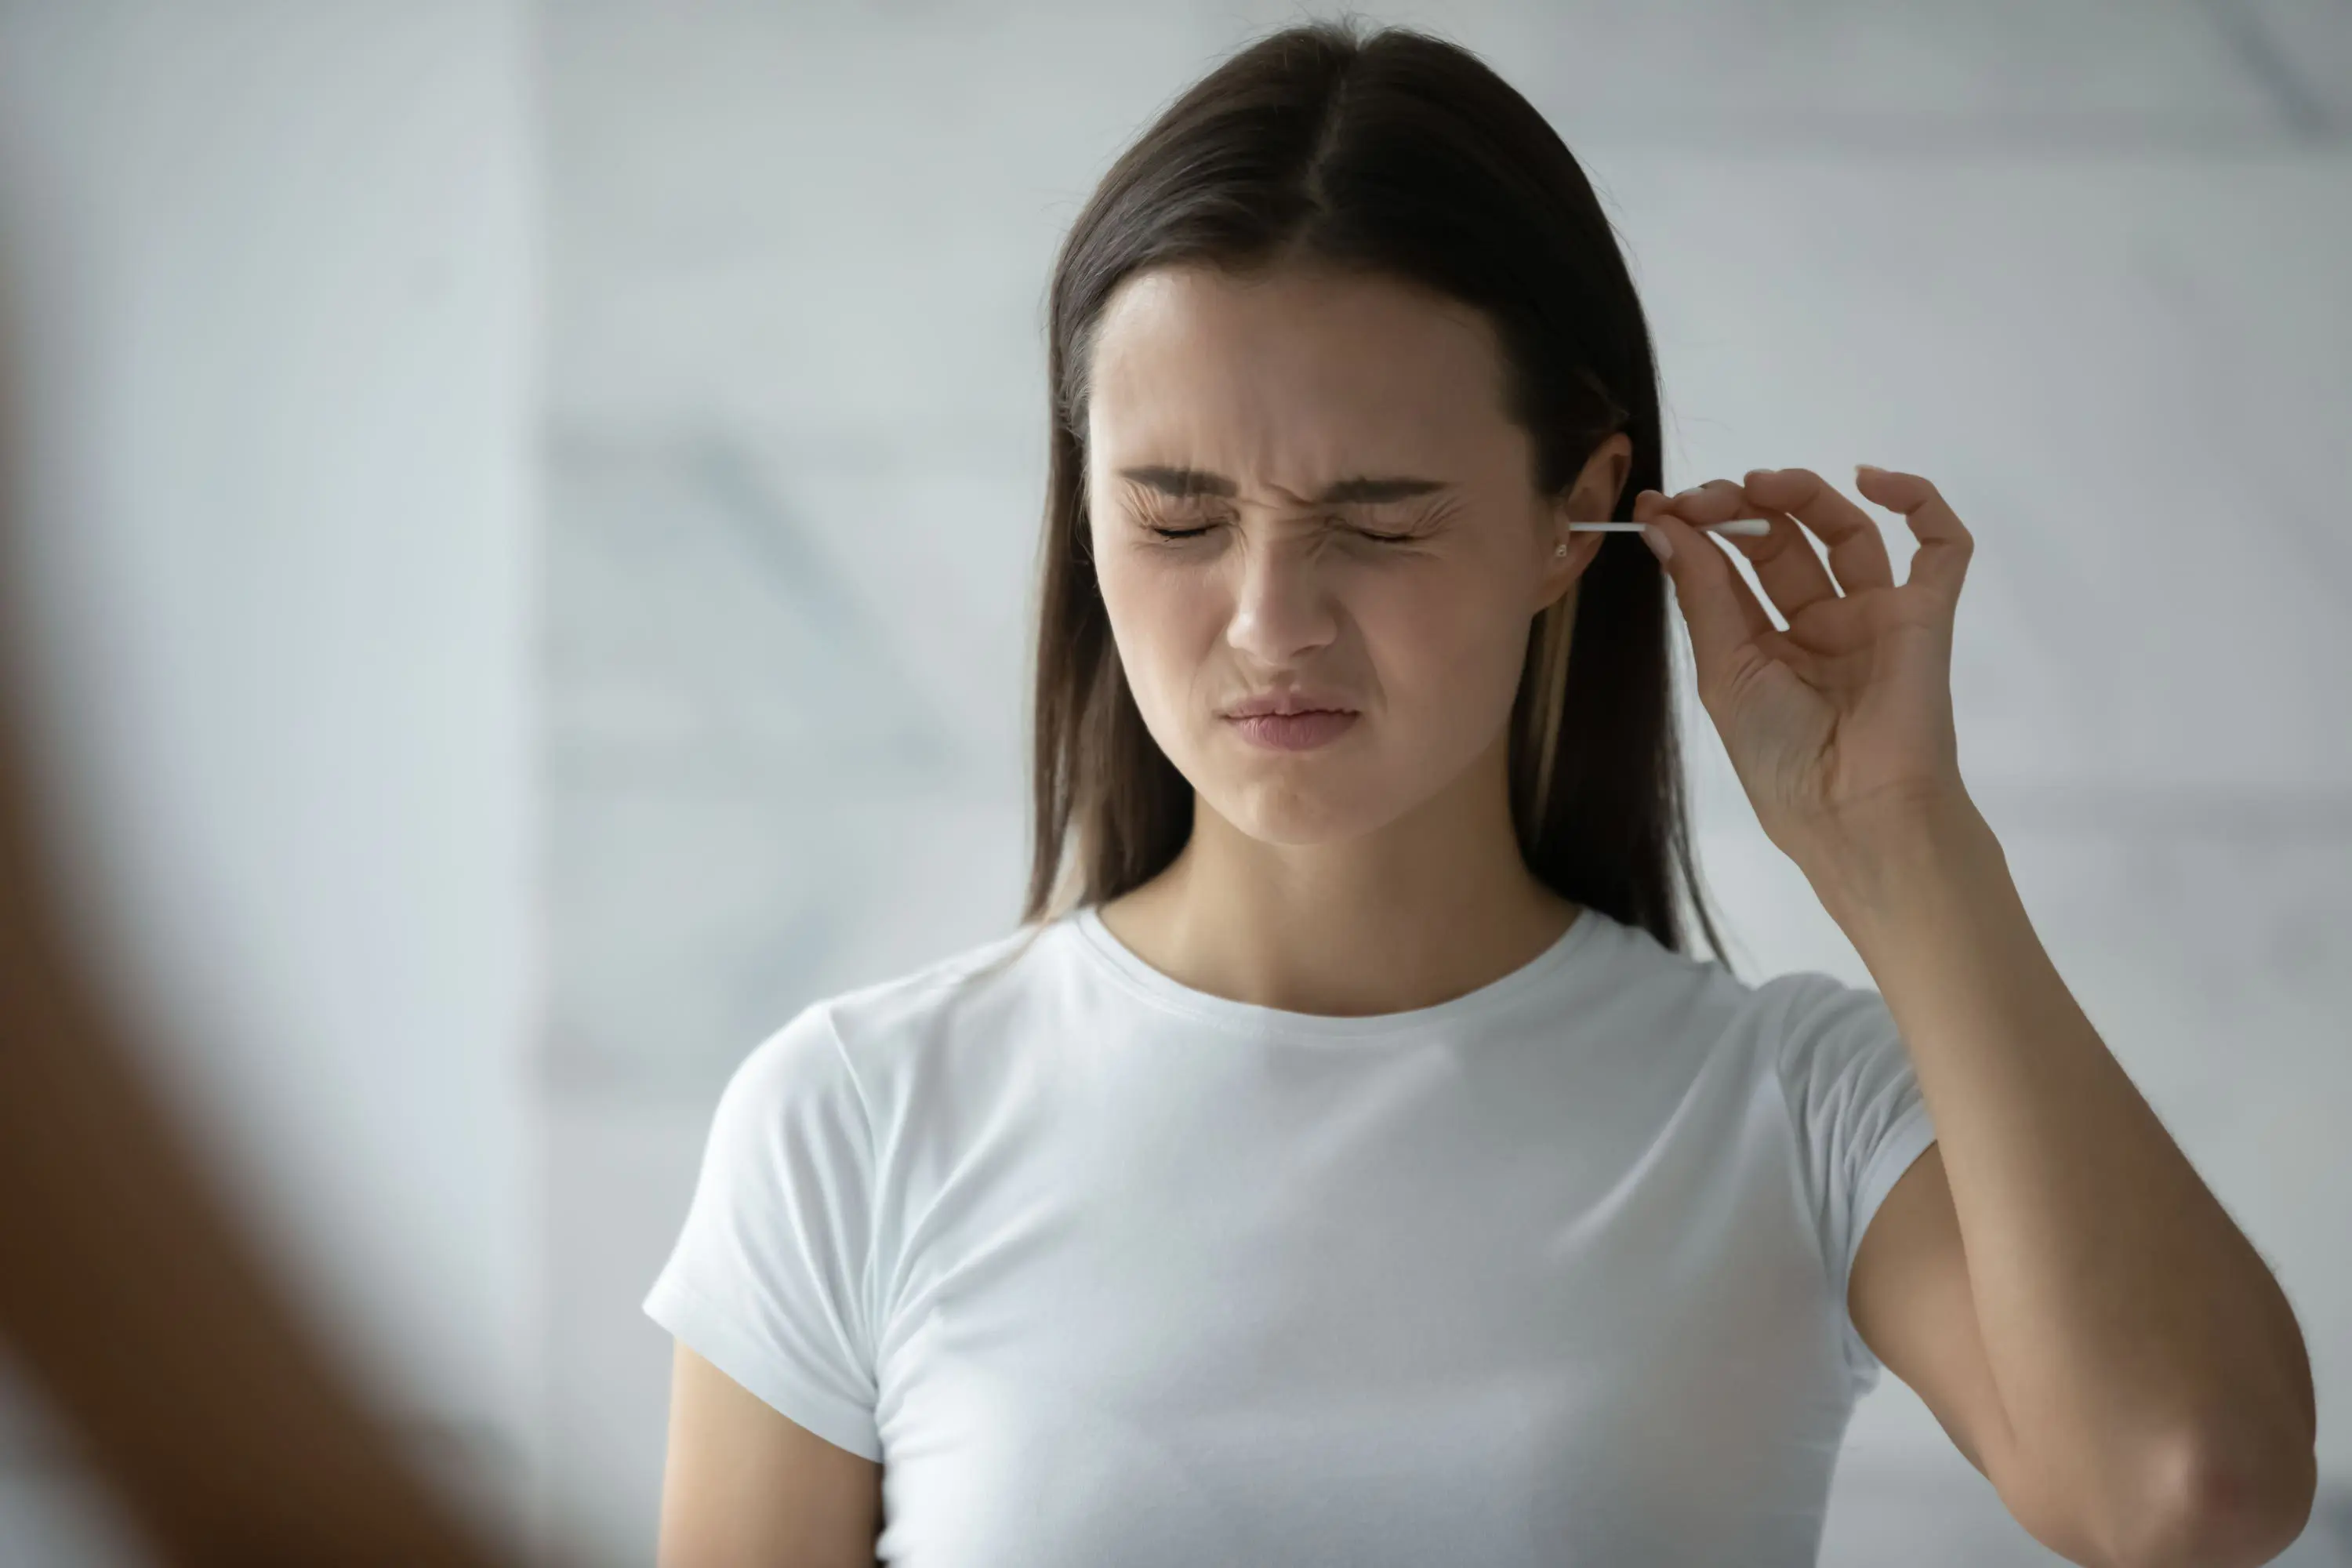 Woman with earbud in ear scaled